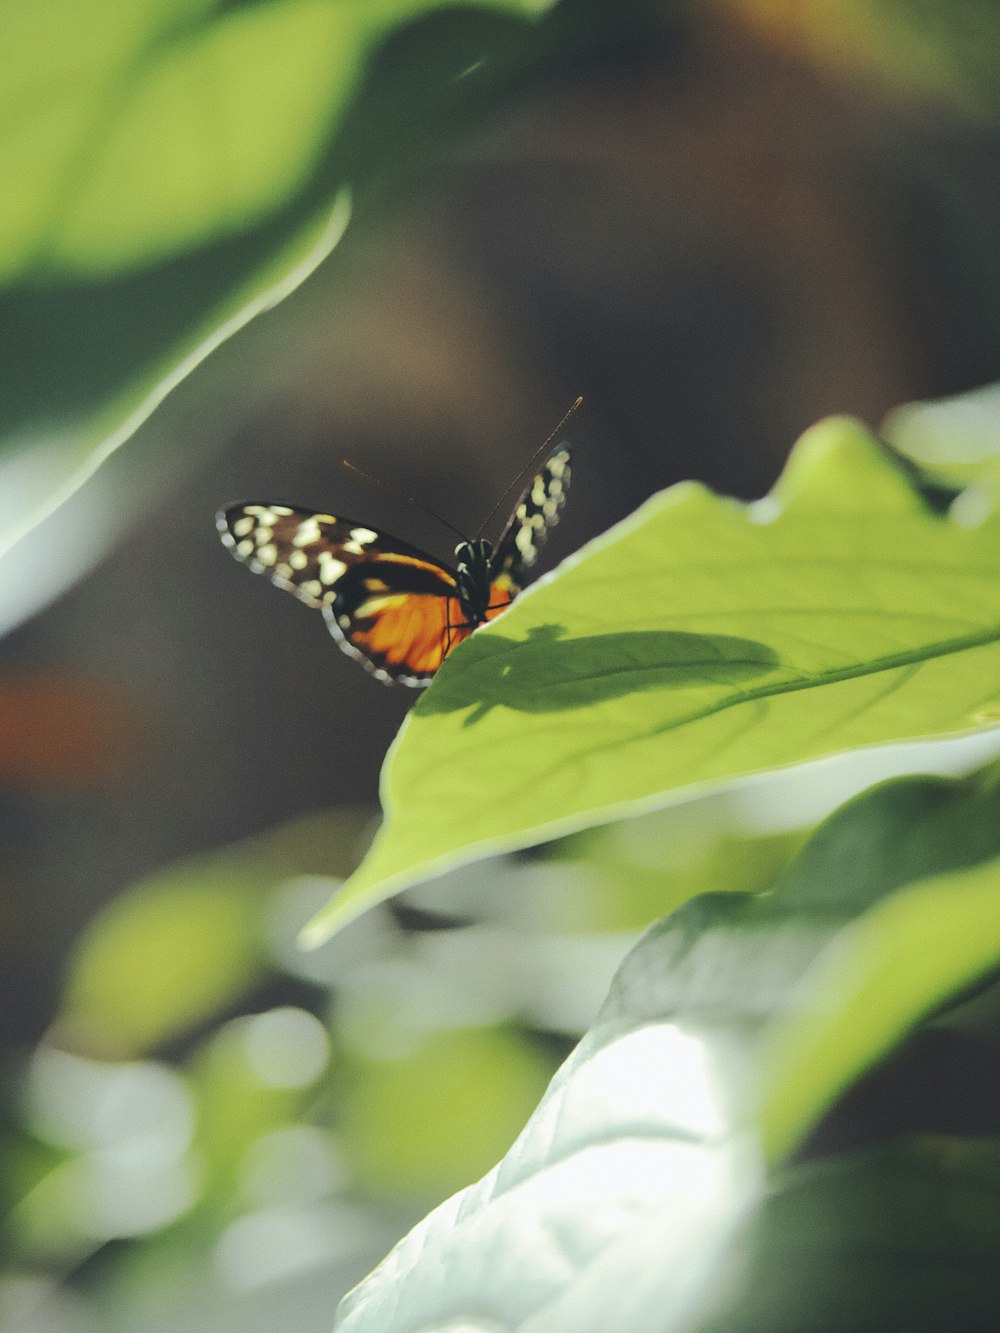 monarch butterfly perched on green leaf in close up photography during daytime